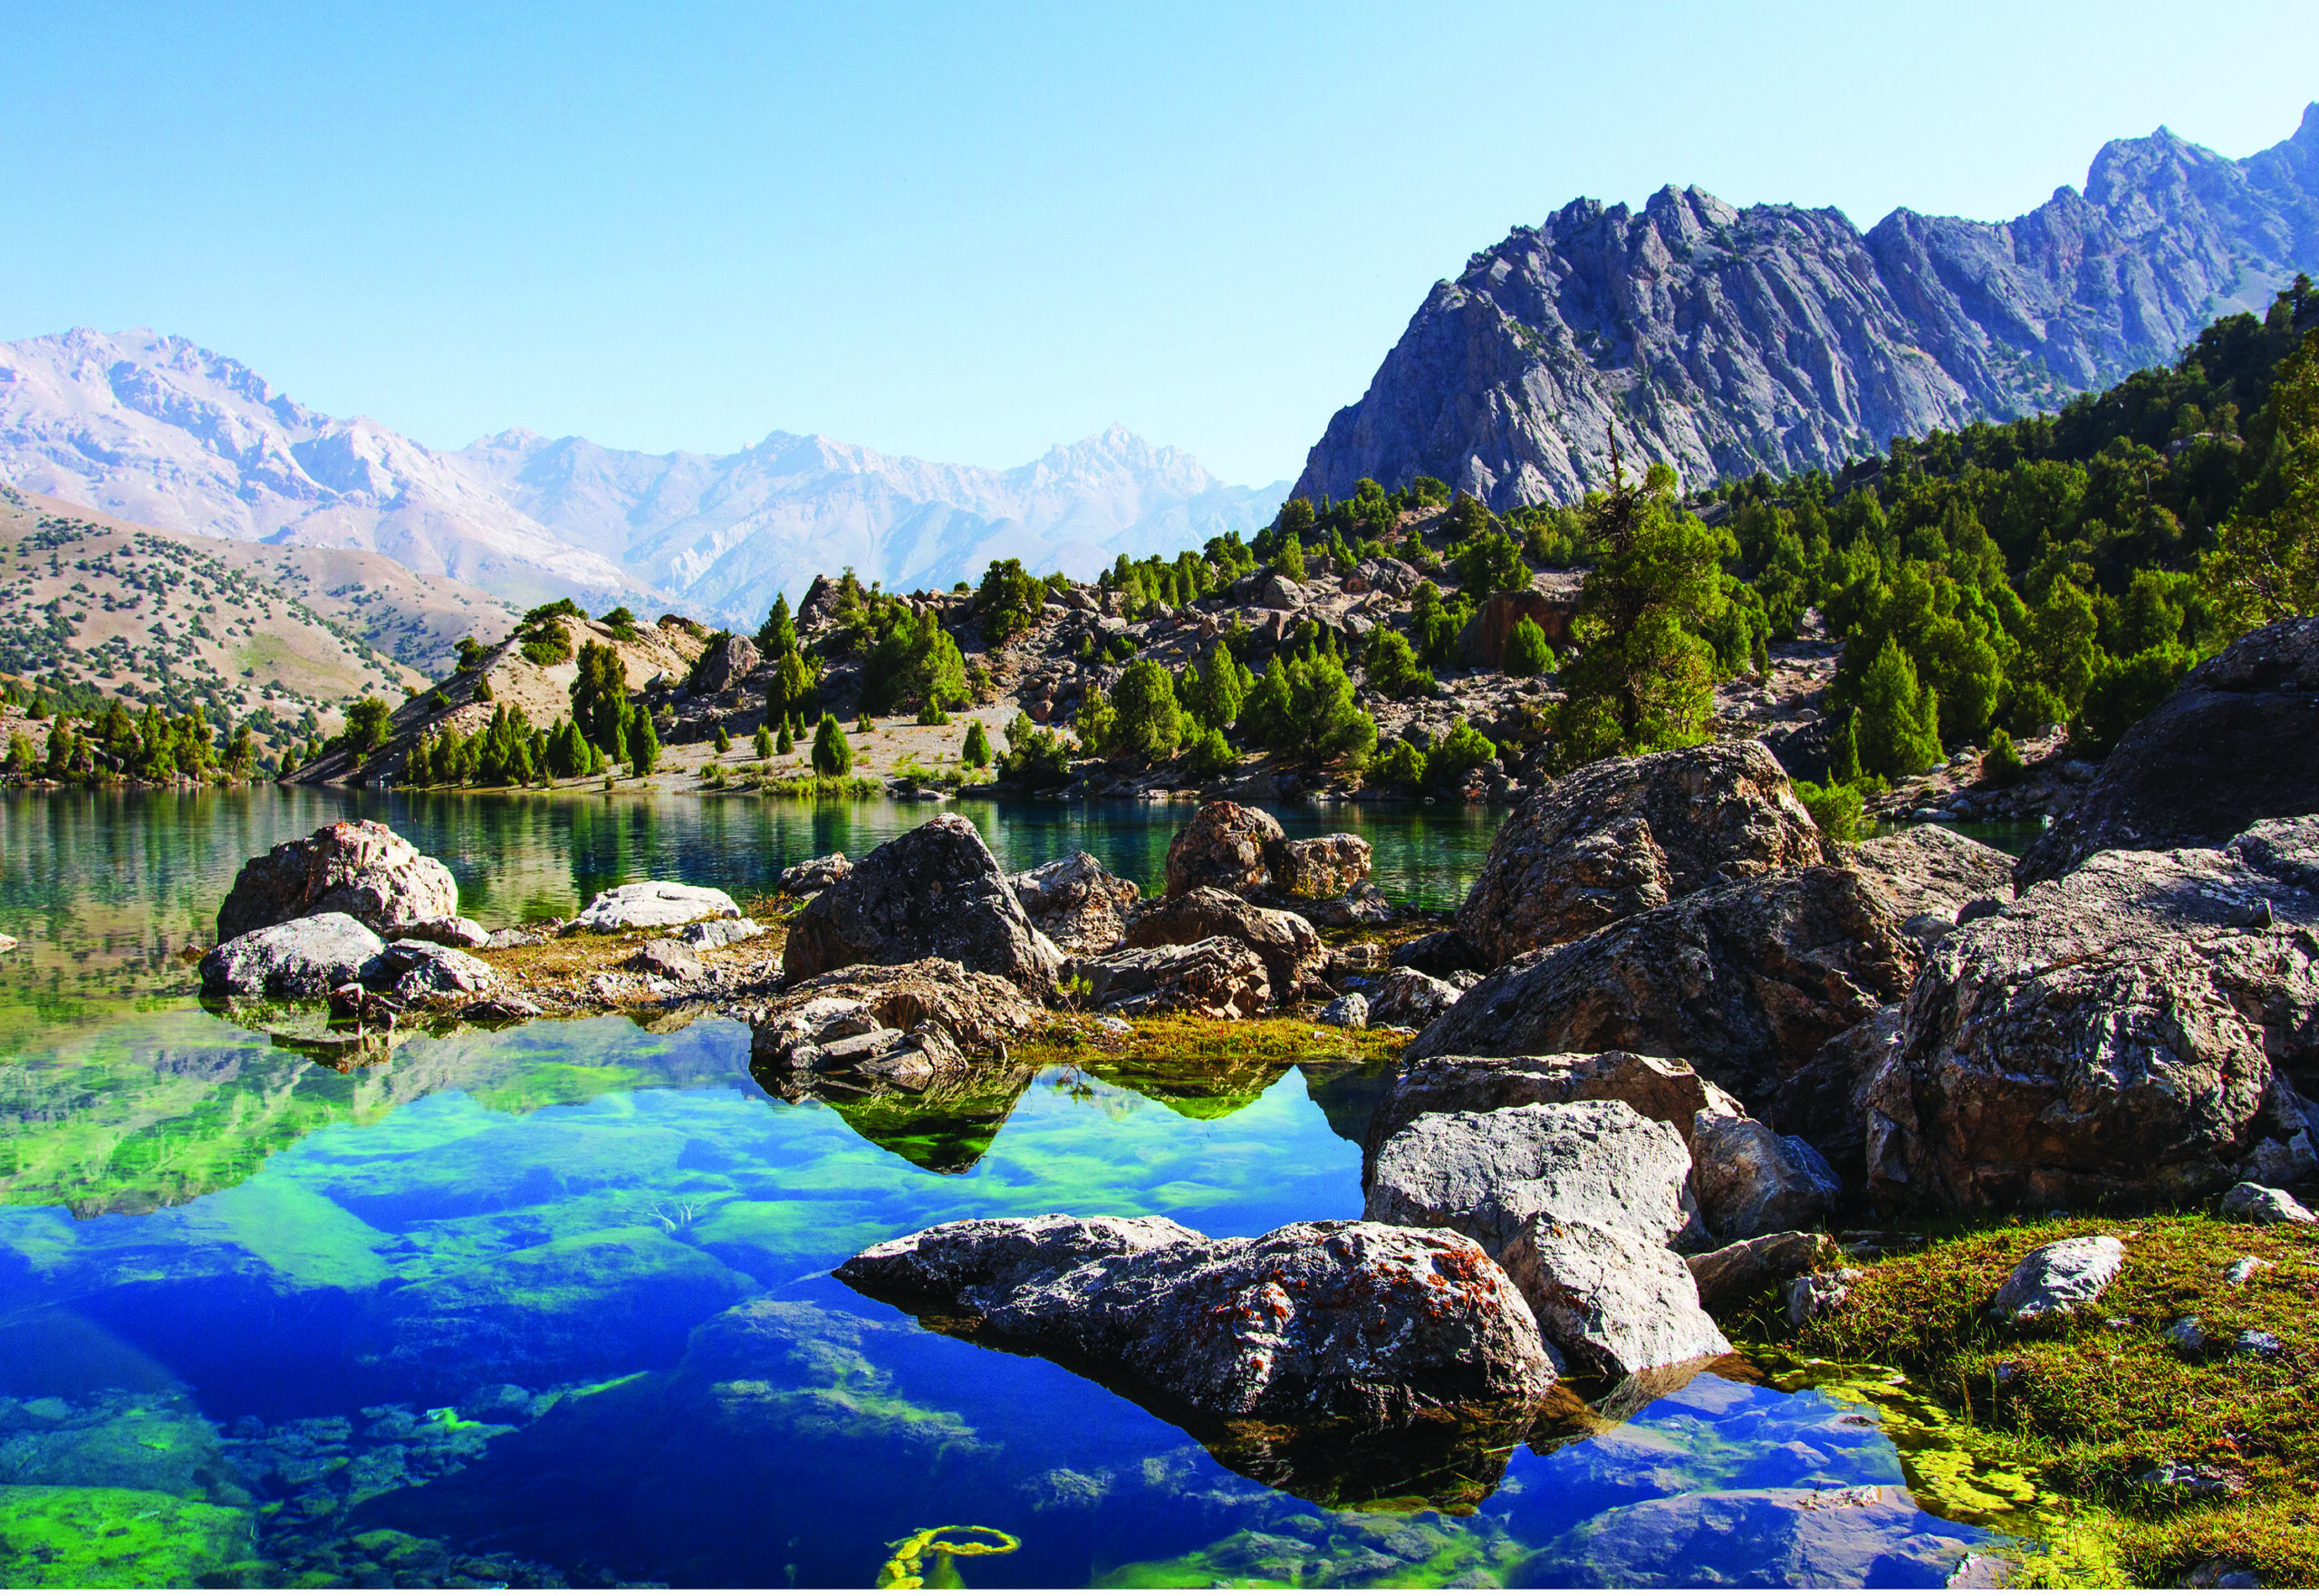 Alauddin Lake in Fann Mountains, Tajikistan reflects the pure nature in the country